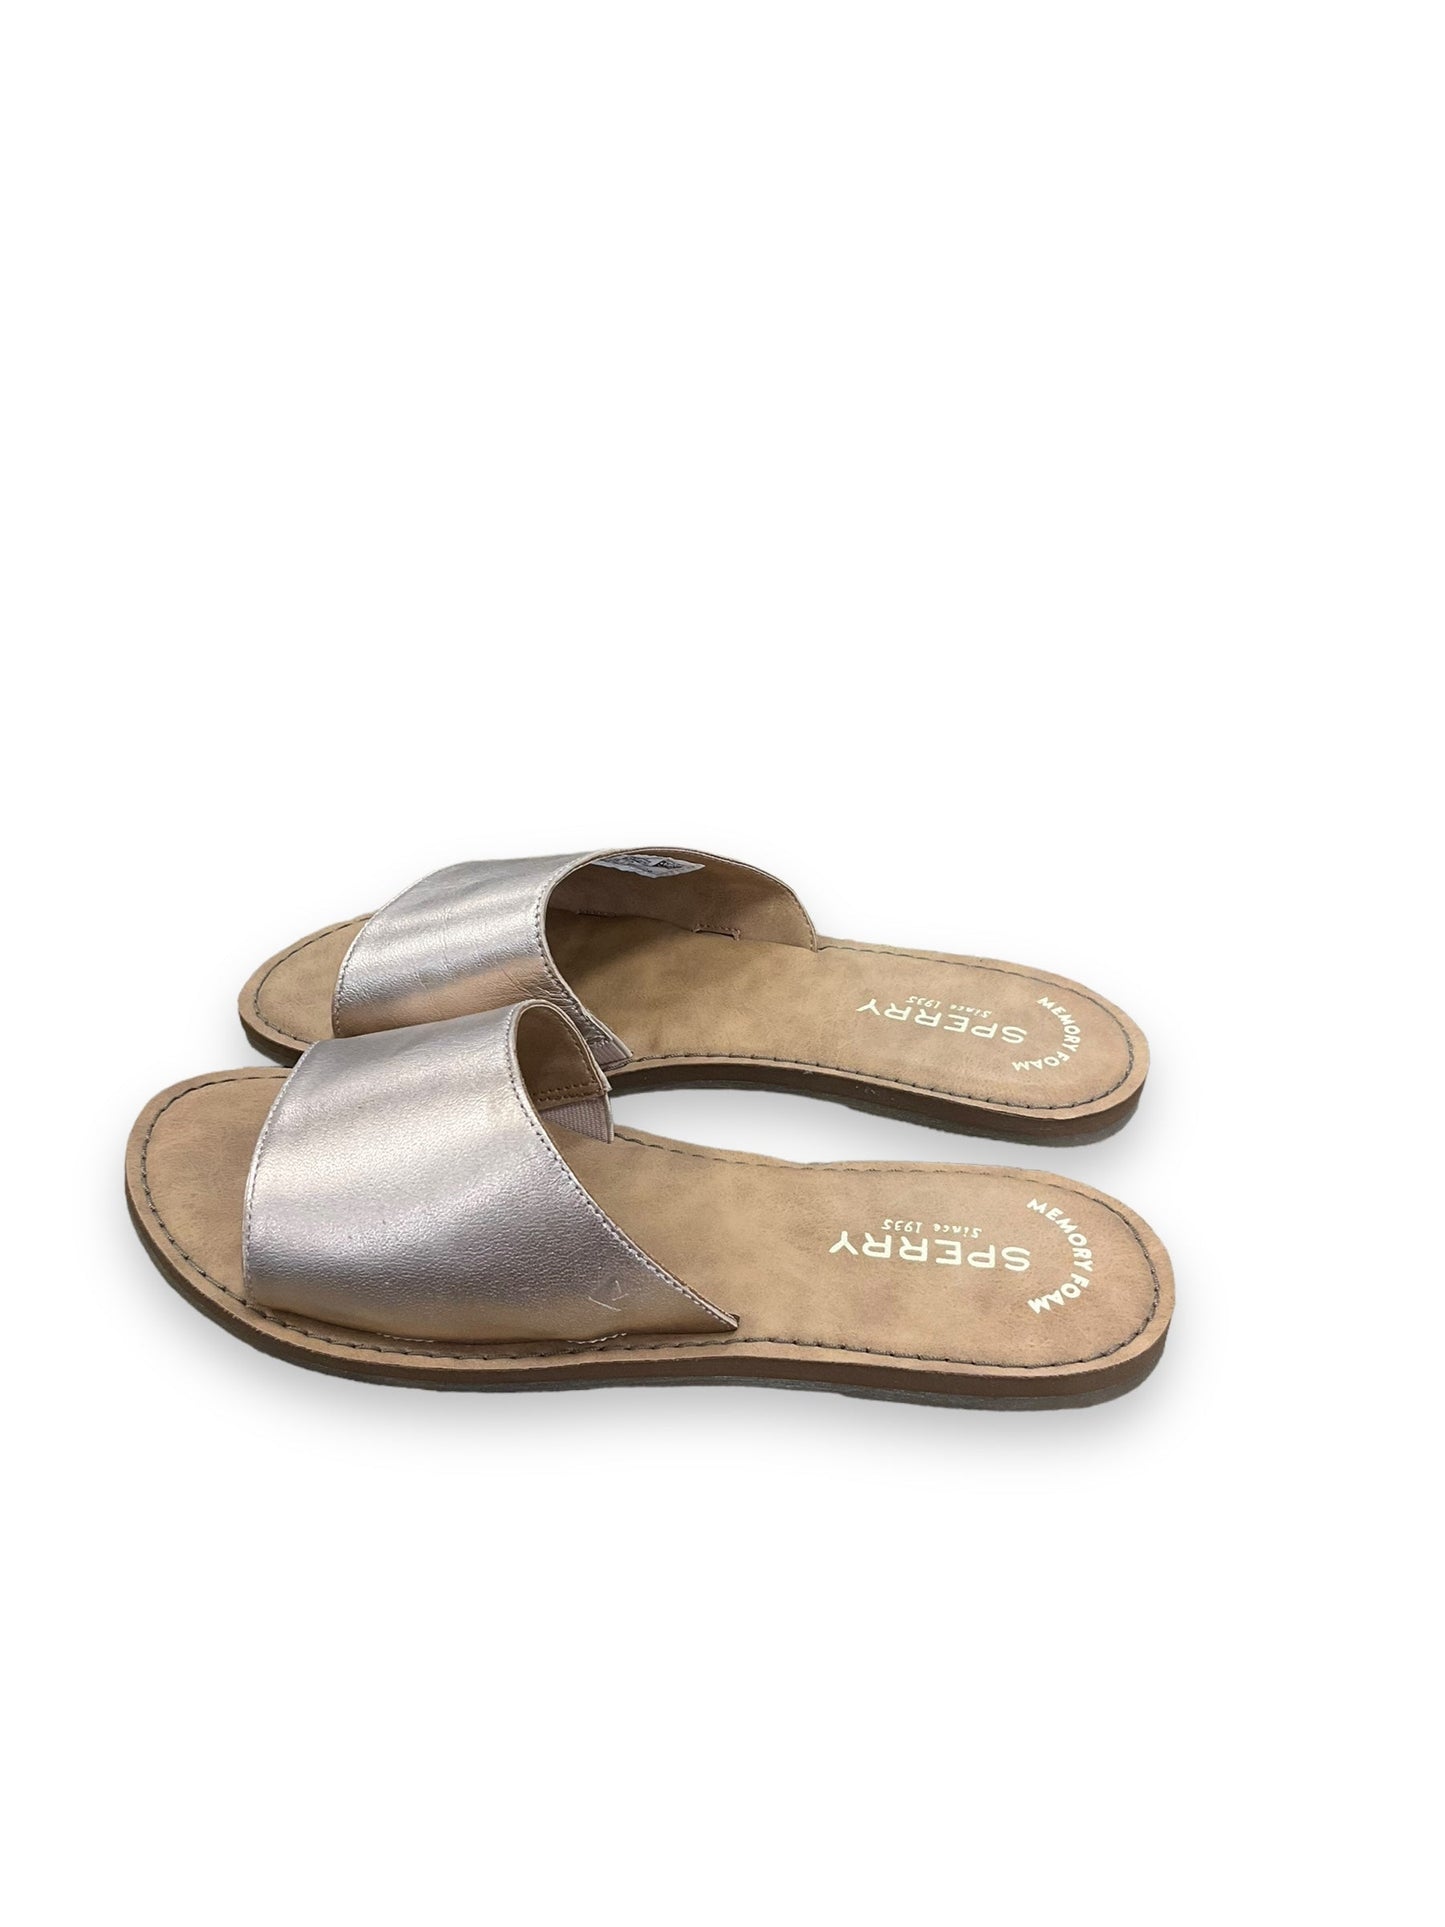 Rose Gold Sandals Flats Sperry, Size 9